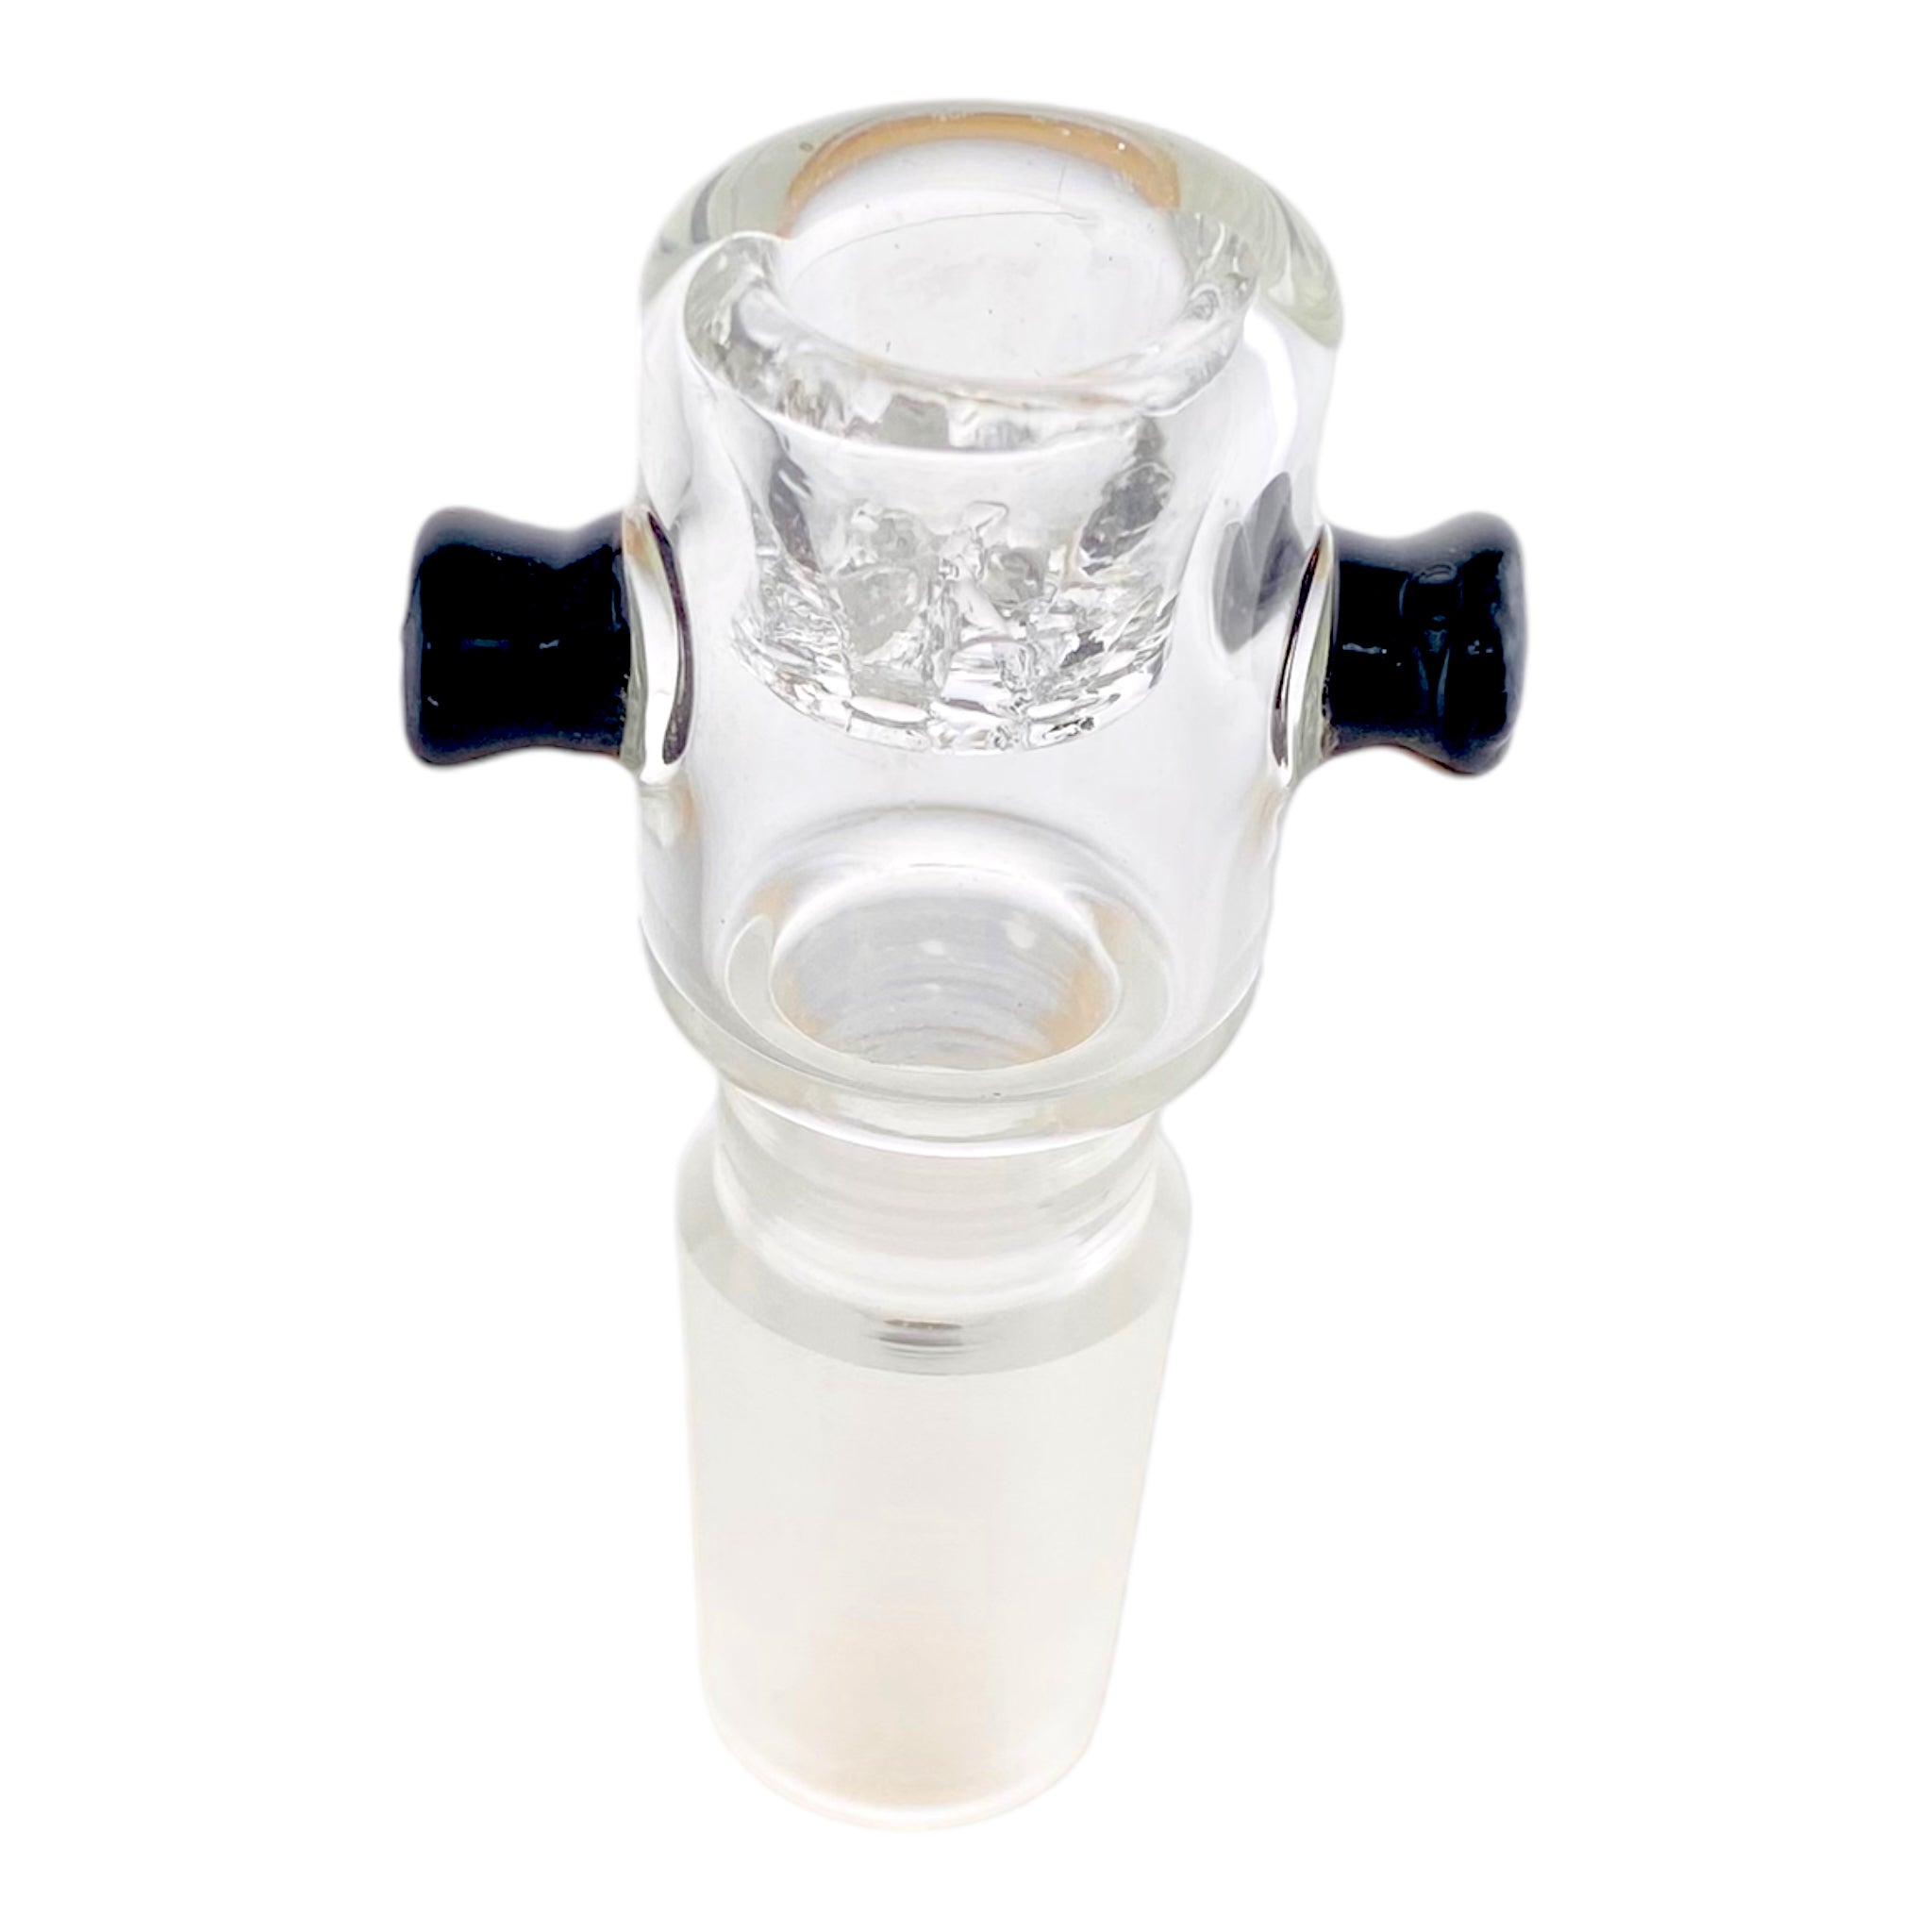 18mm Flower Bowl - Tall Cylinder Bong Bowl Piece With Built In Screen - Clear